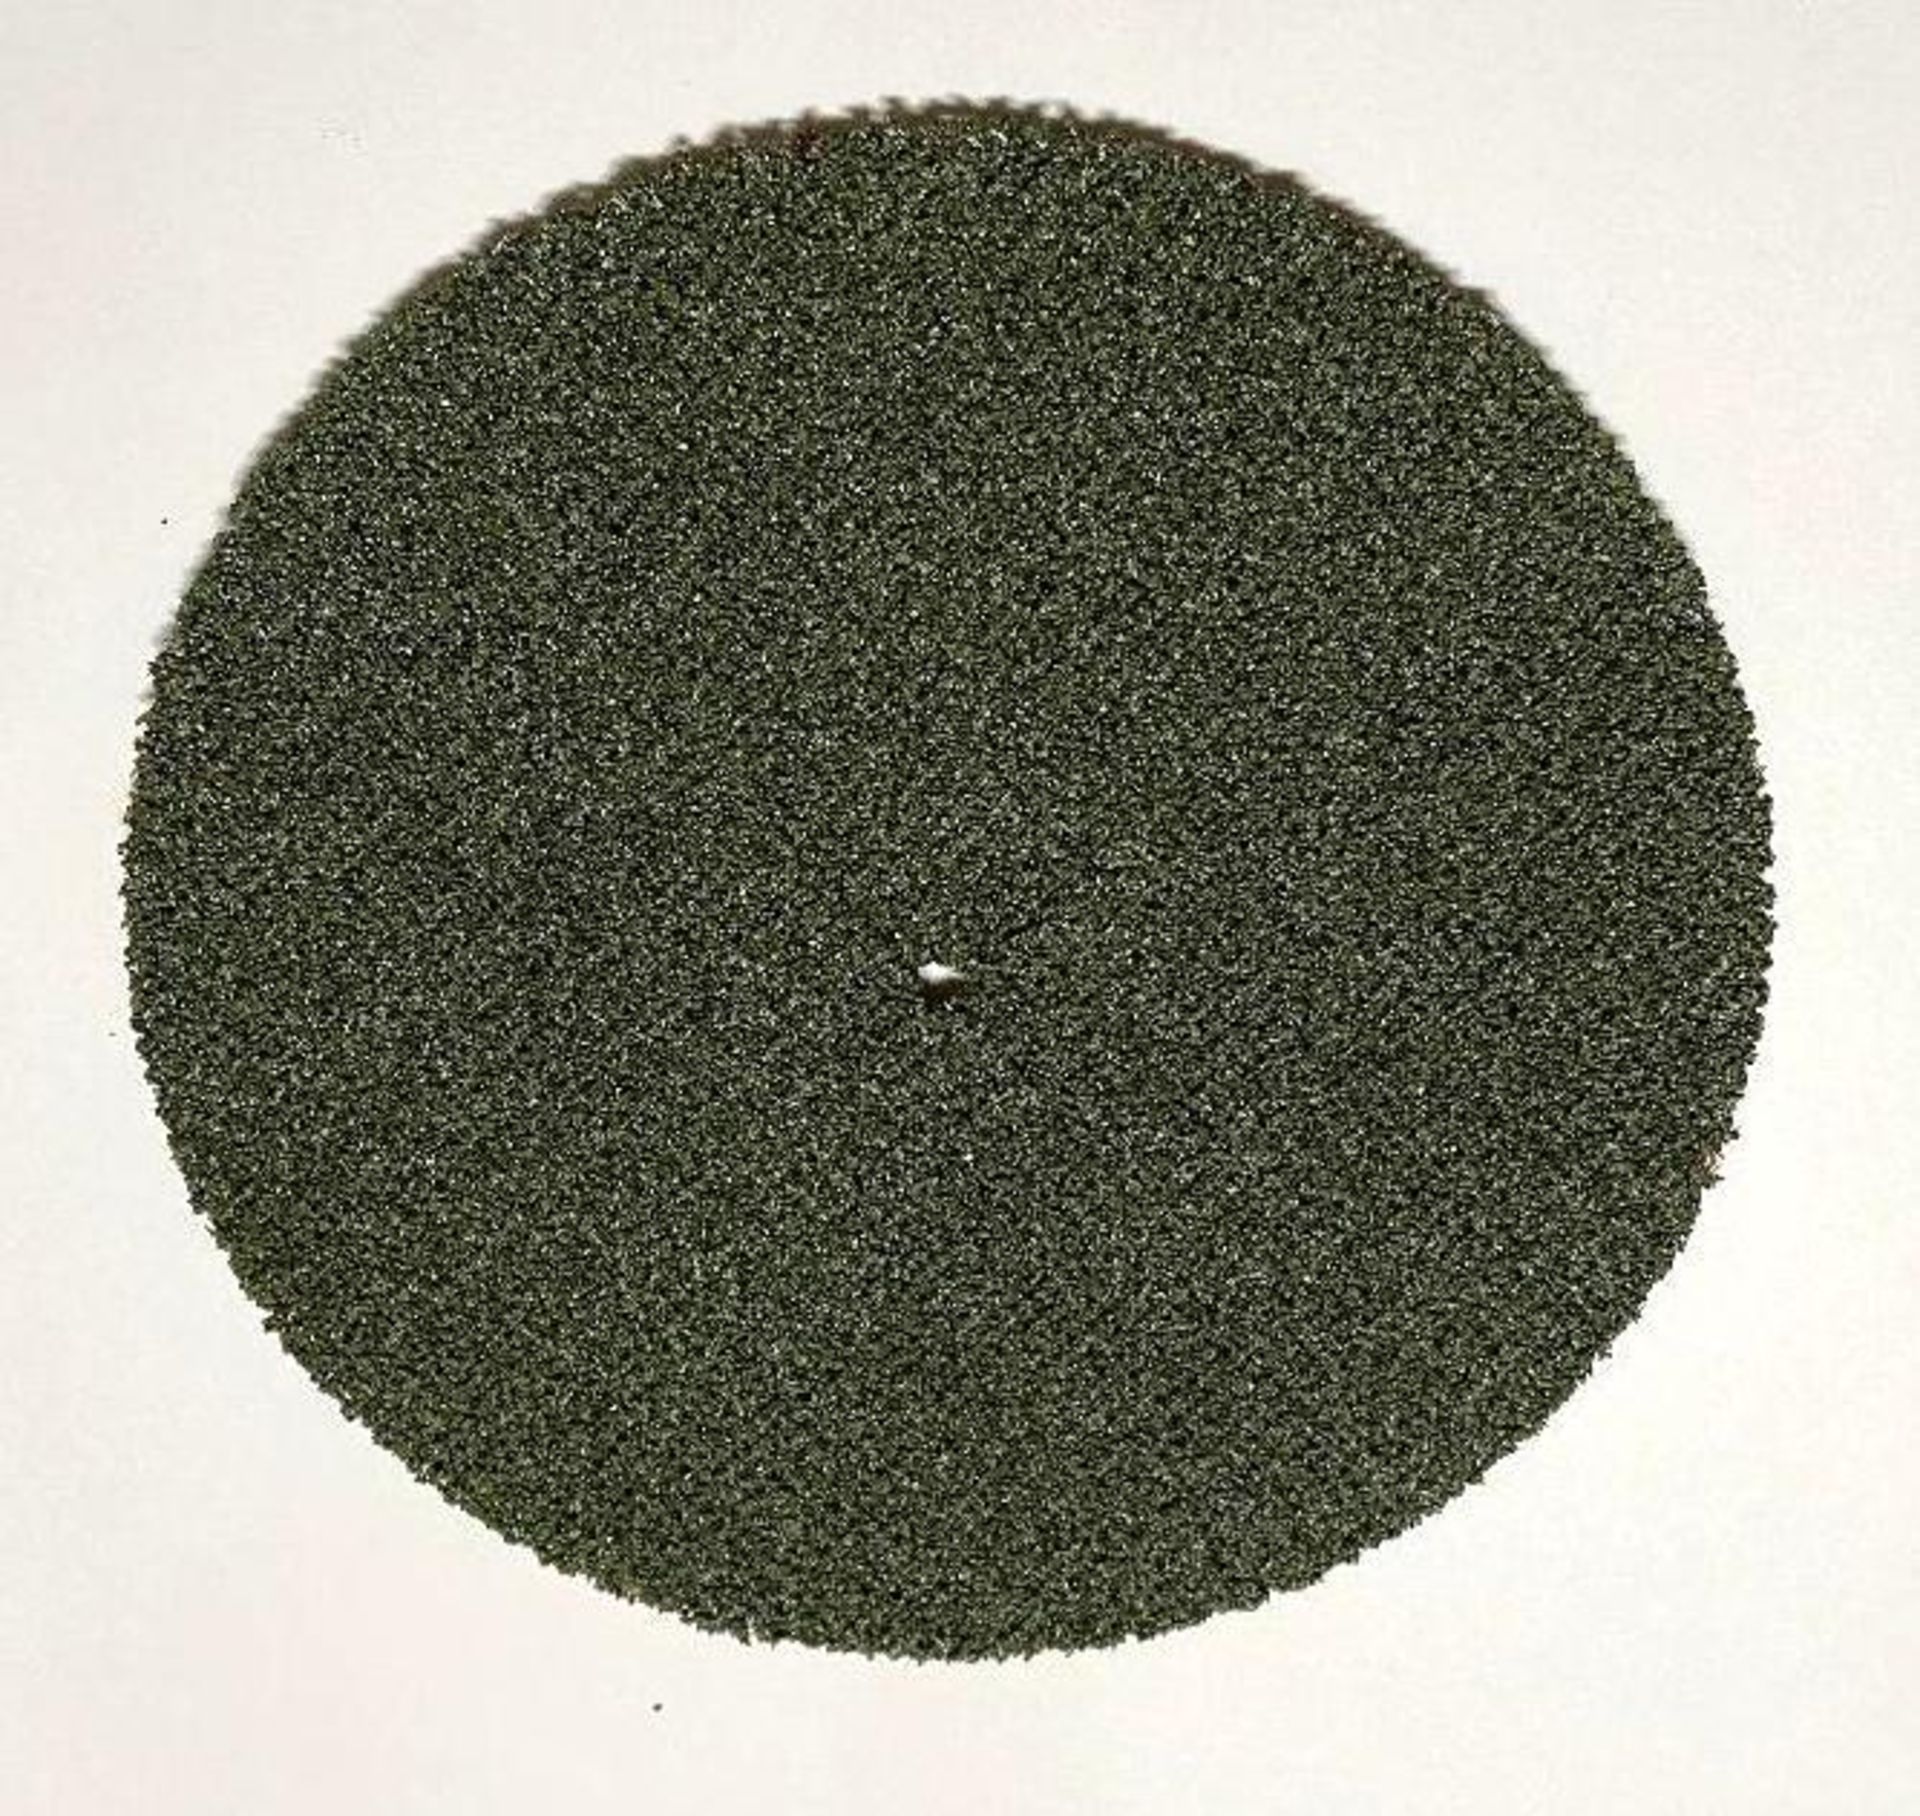 DESCRIPTION (2) CASES OF 7" GREEN NET CUTTING DISCS. 200 PER CASE. BRAND / MODEL EAZY POWER 87137 TO